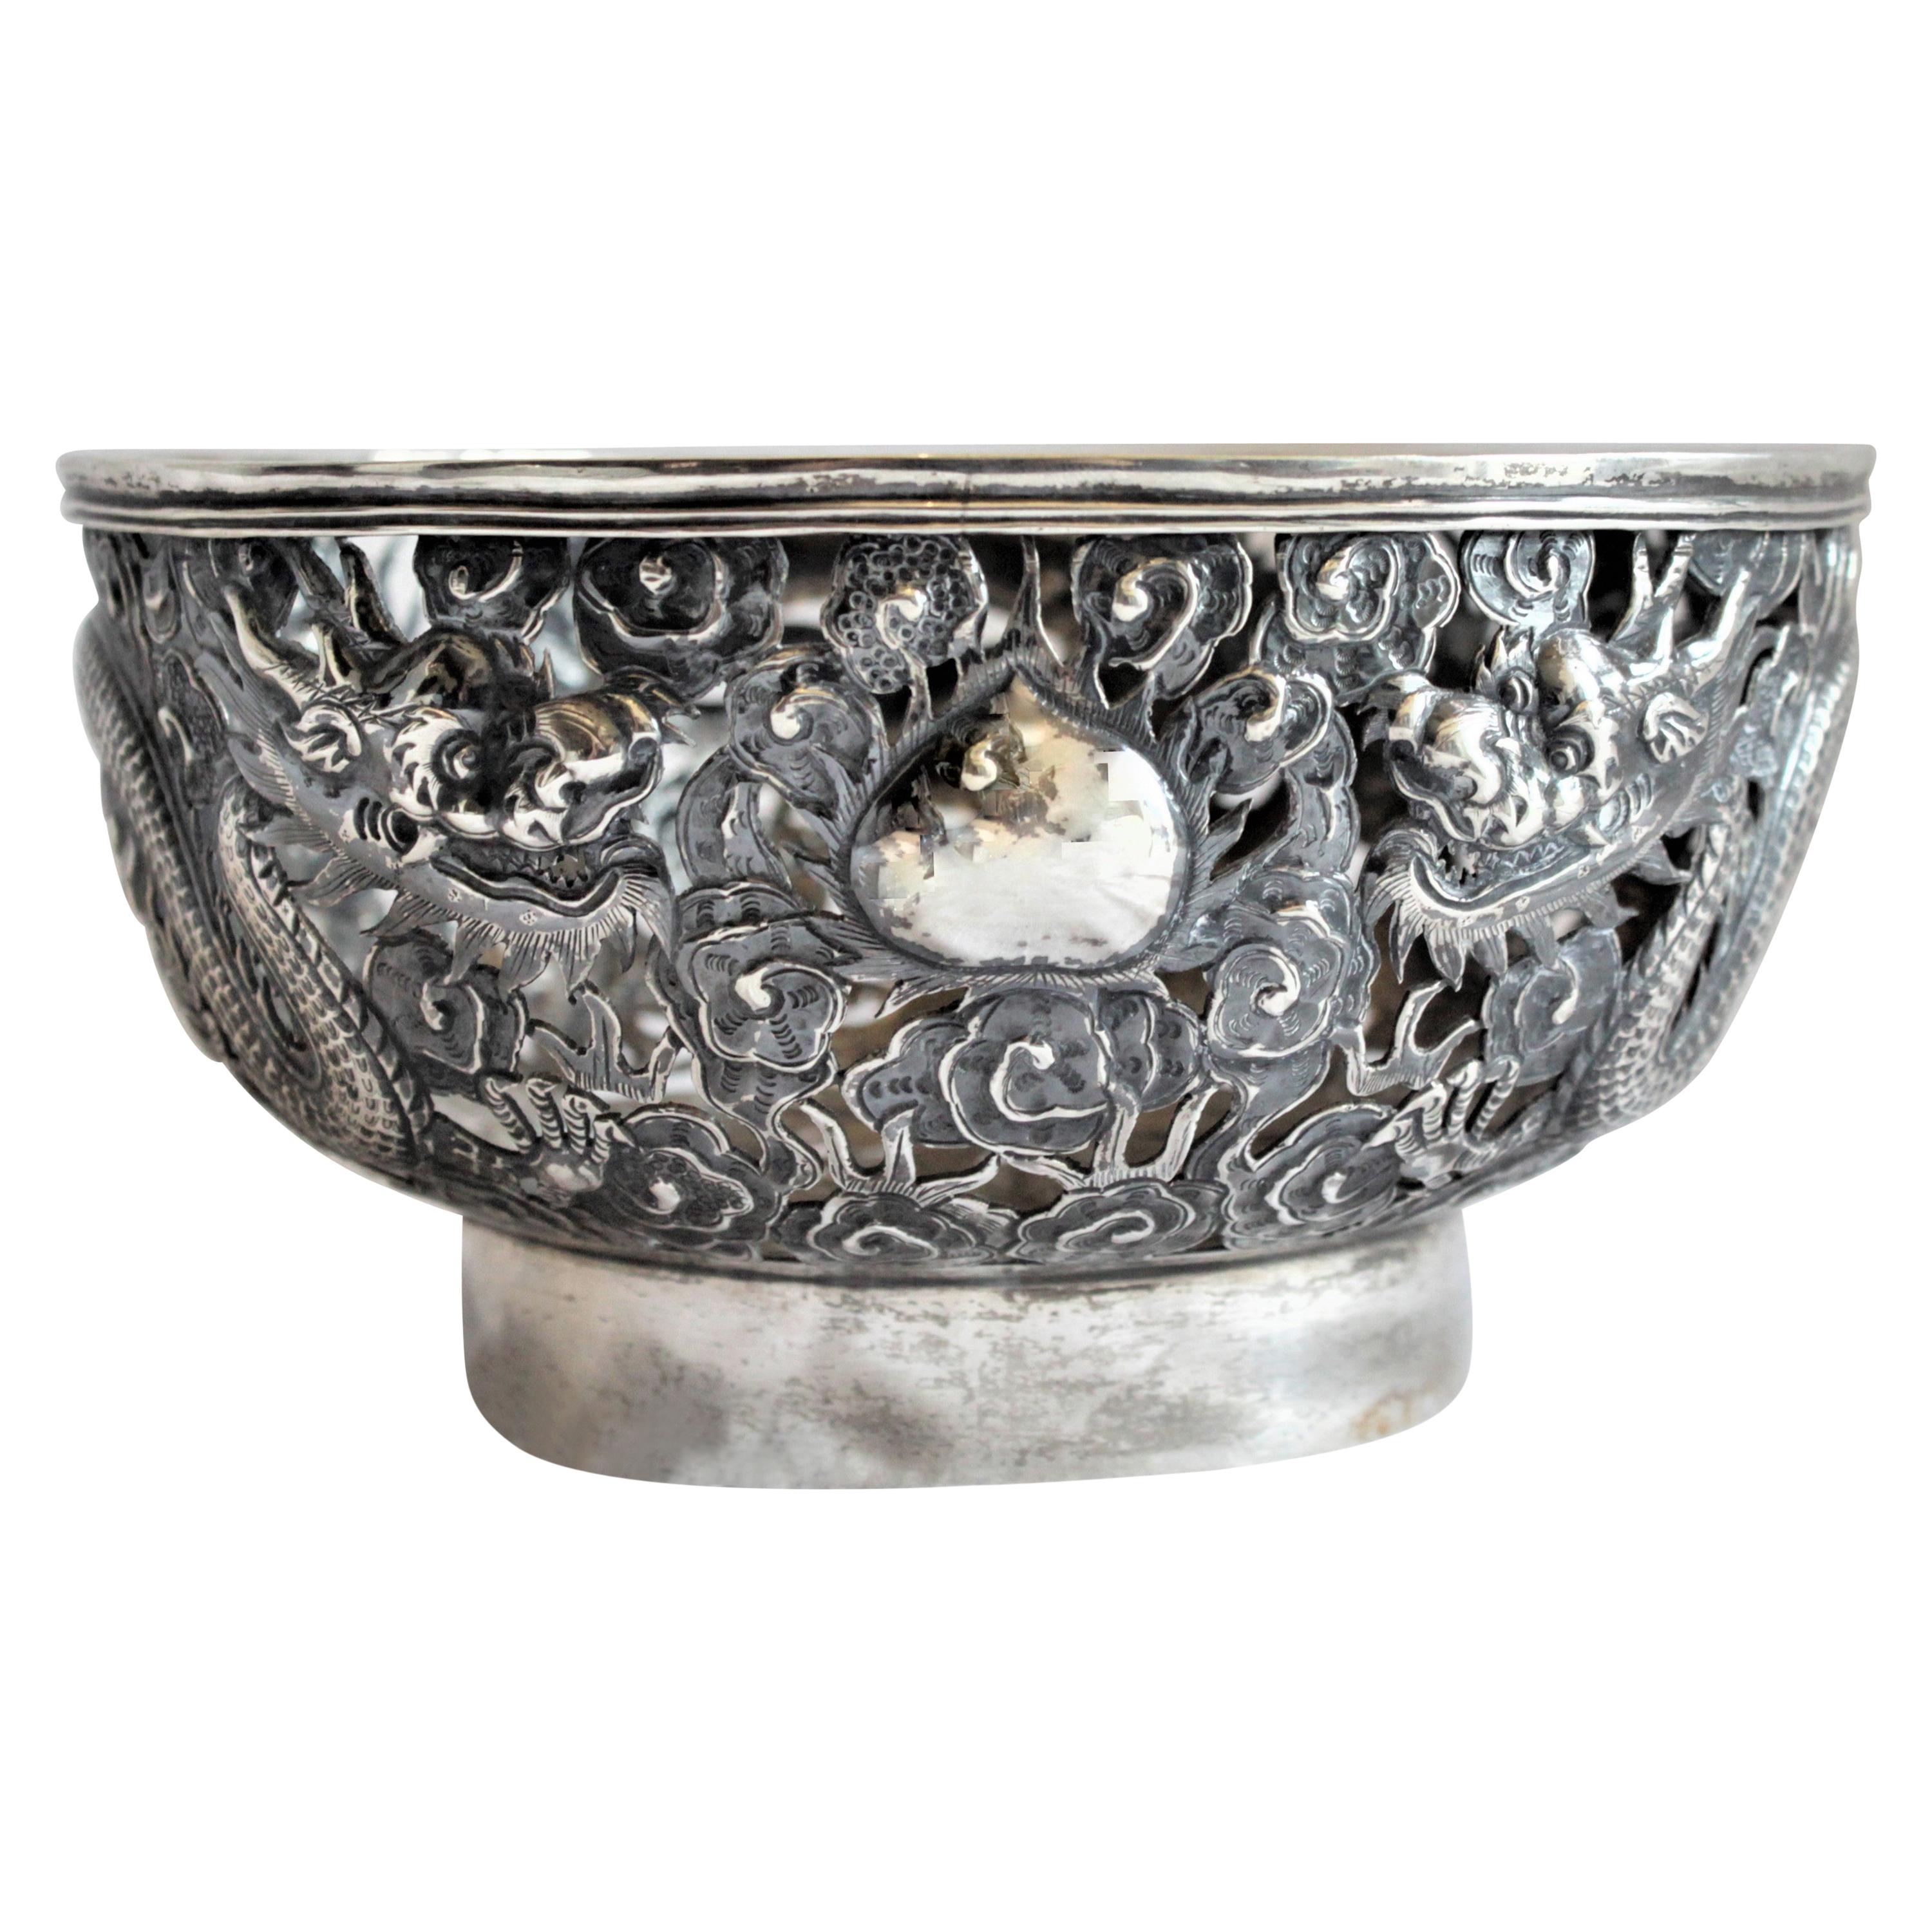 Antique Chinese Qing Dynasty Silver Bowl with Dragons and Flower Decoration